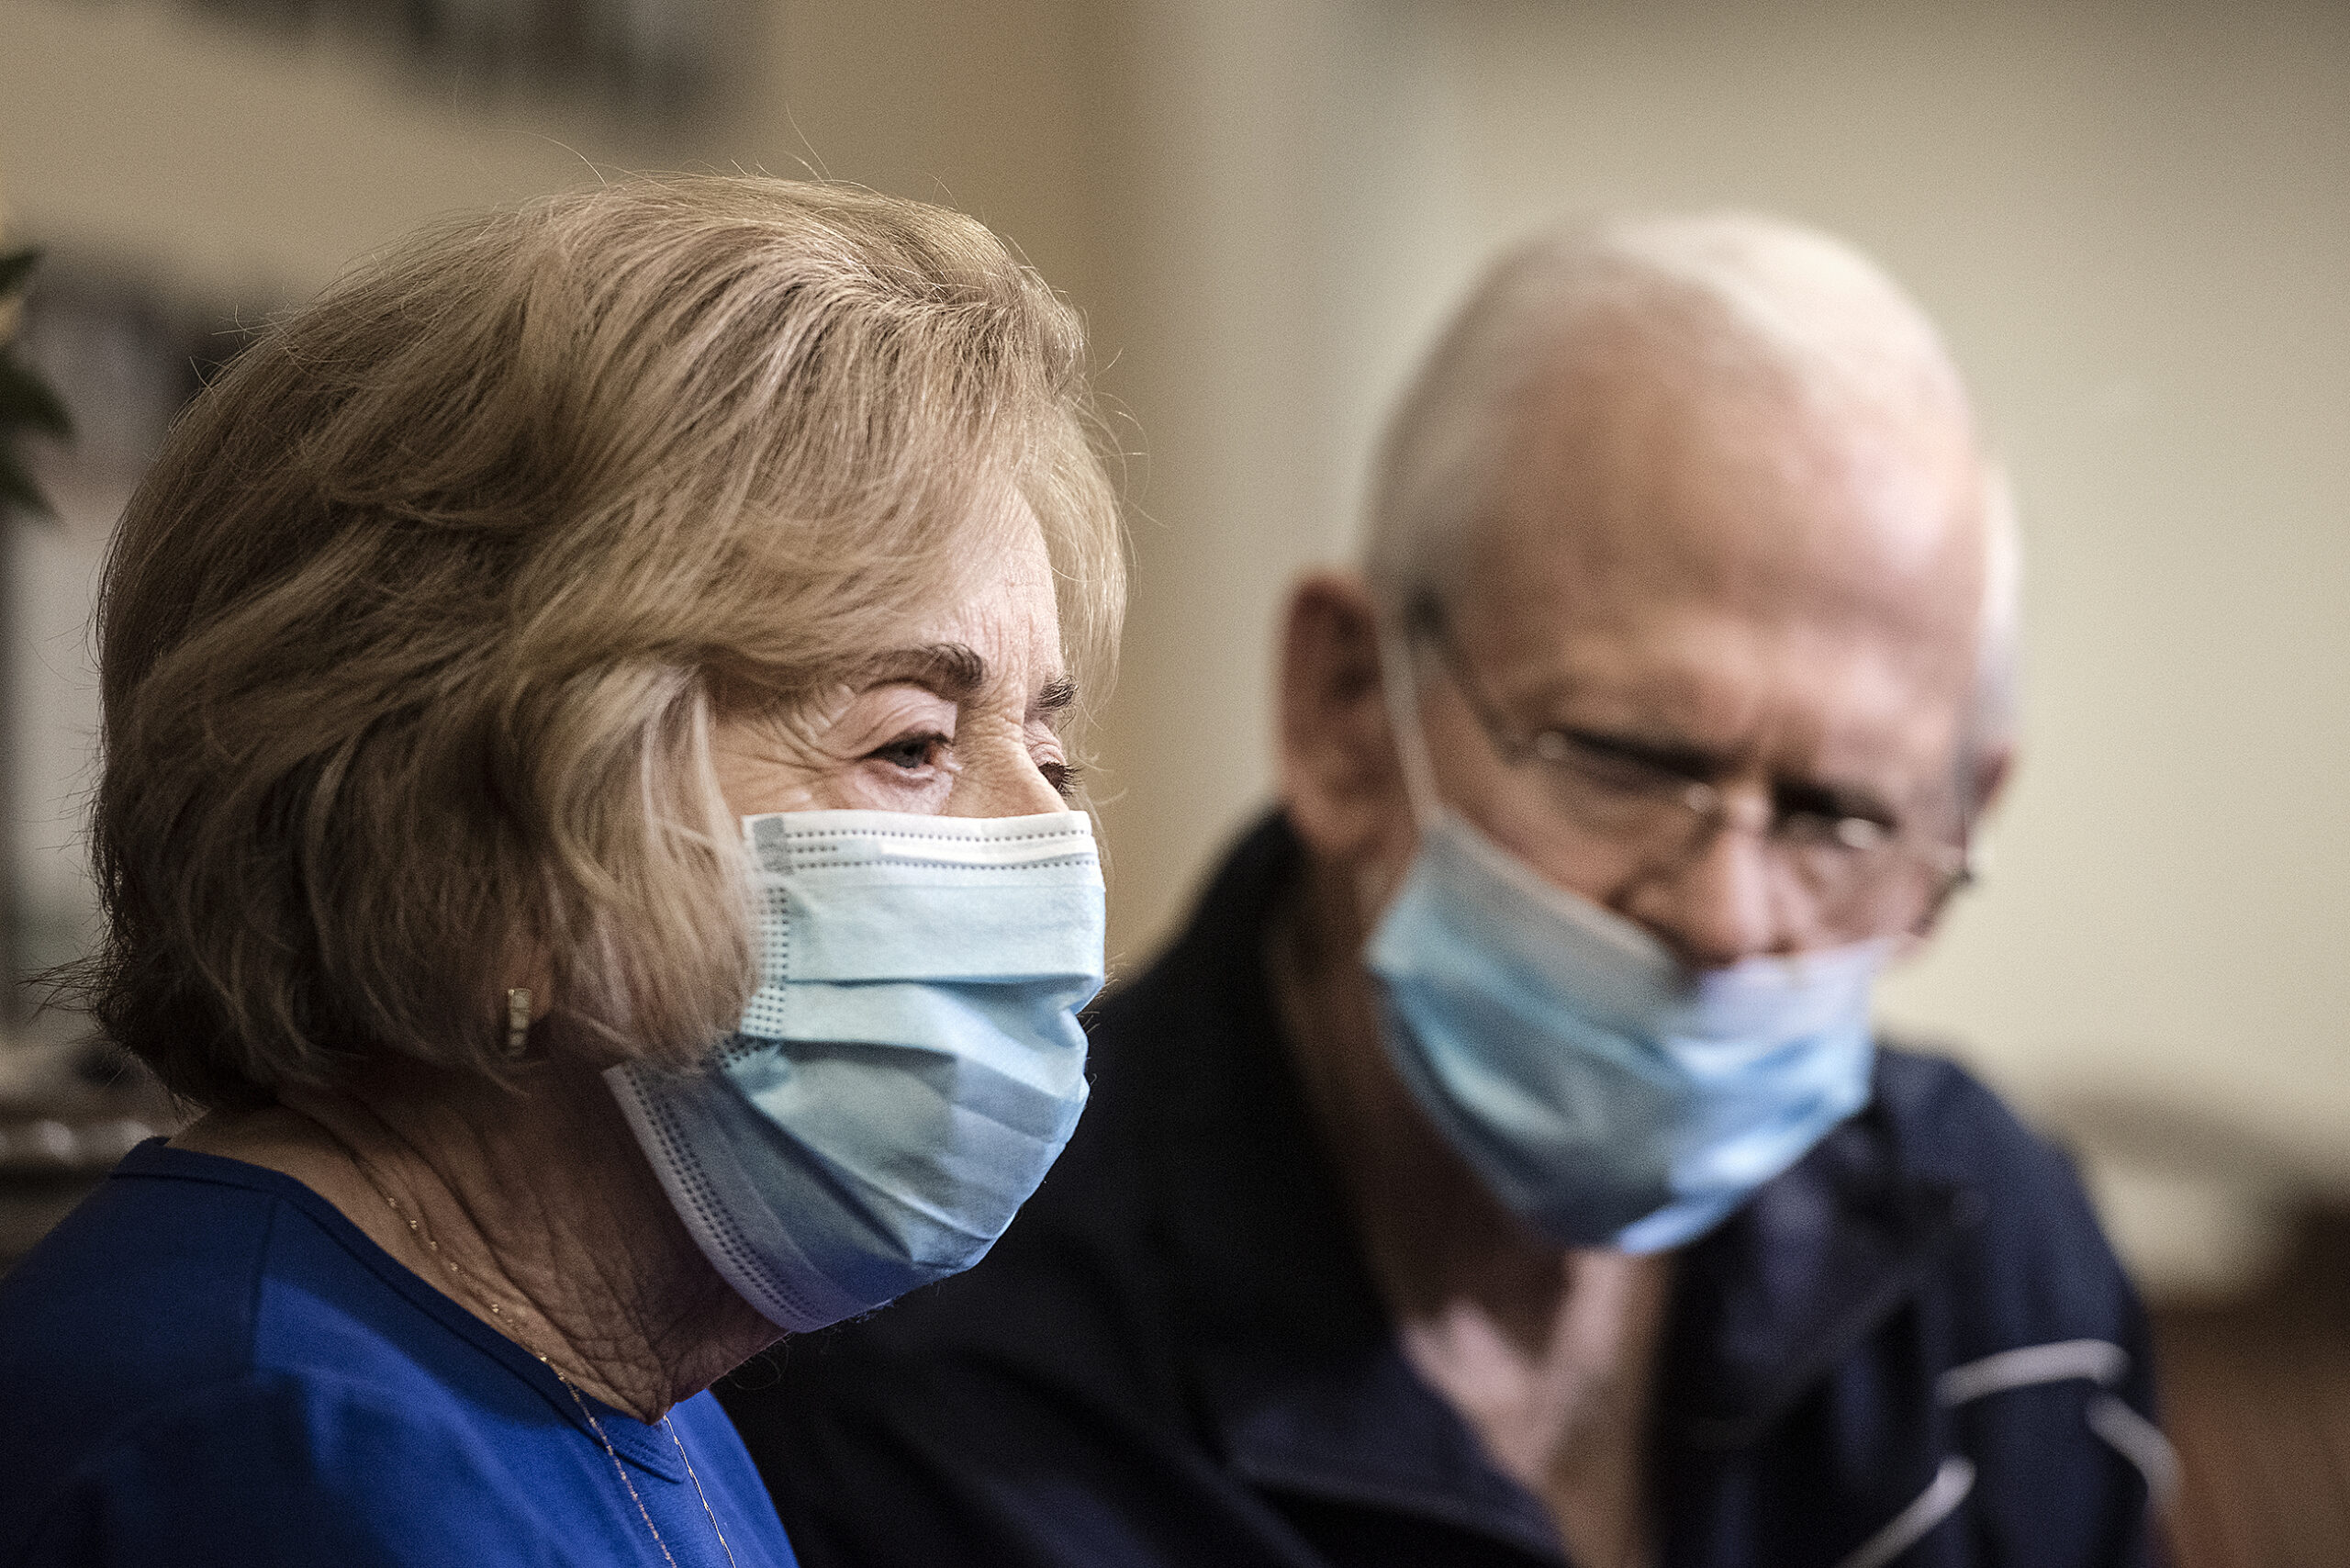 Two people in face masks sit near one another